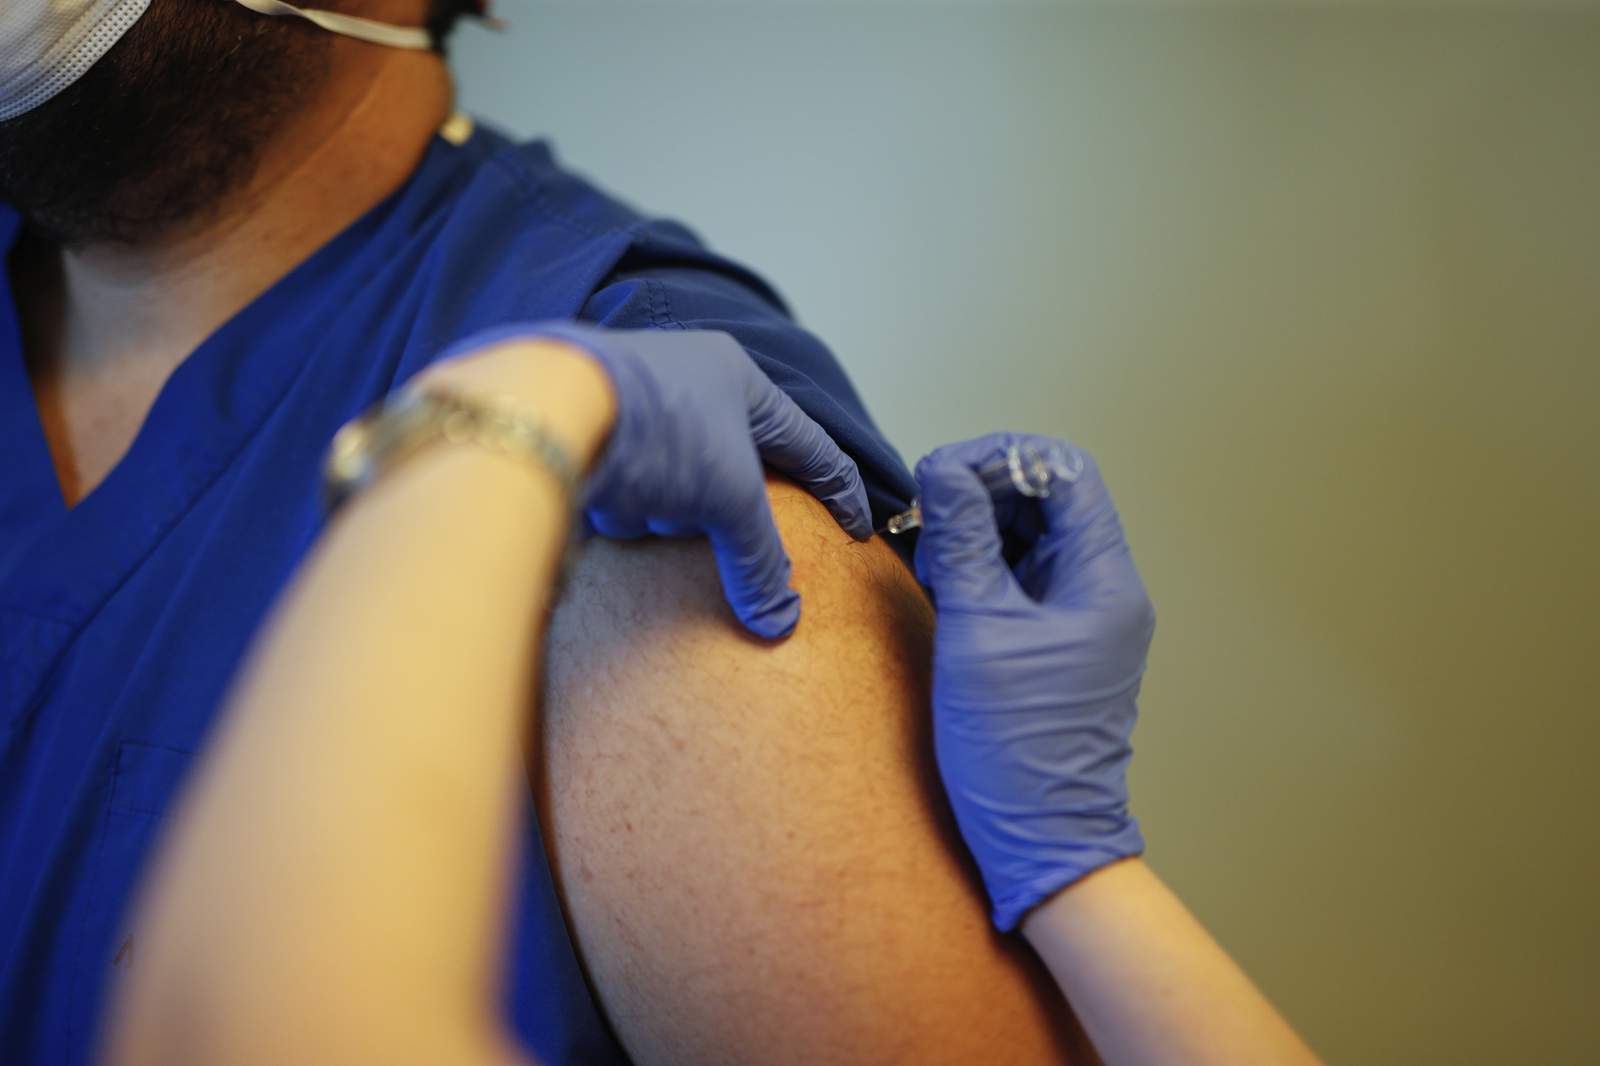 COVID-19 vaccine could become available as early as Dec. 15, Michigan health official says